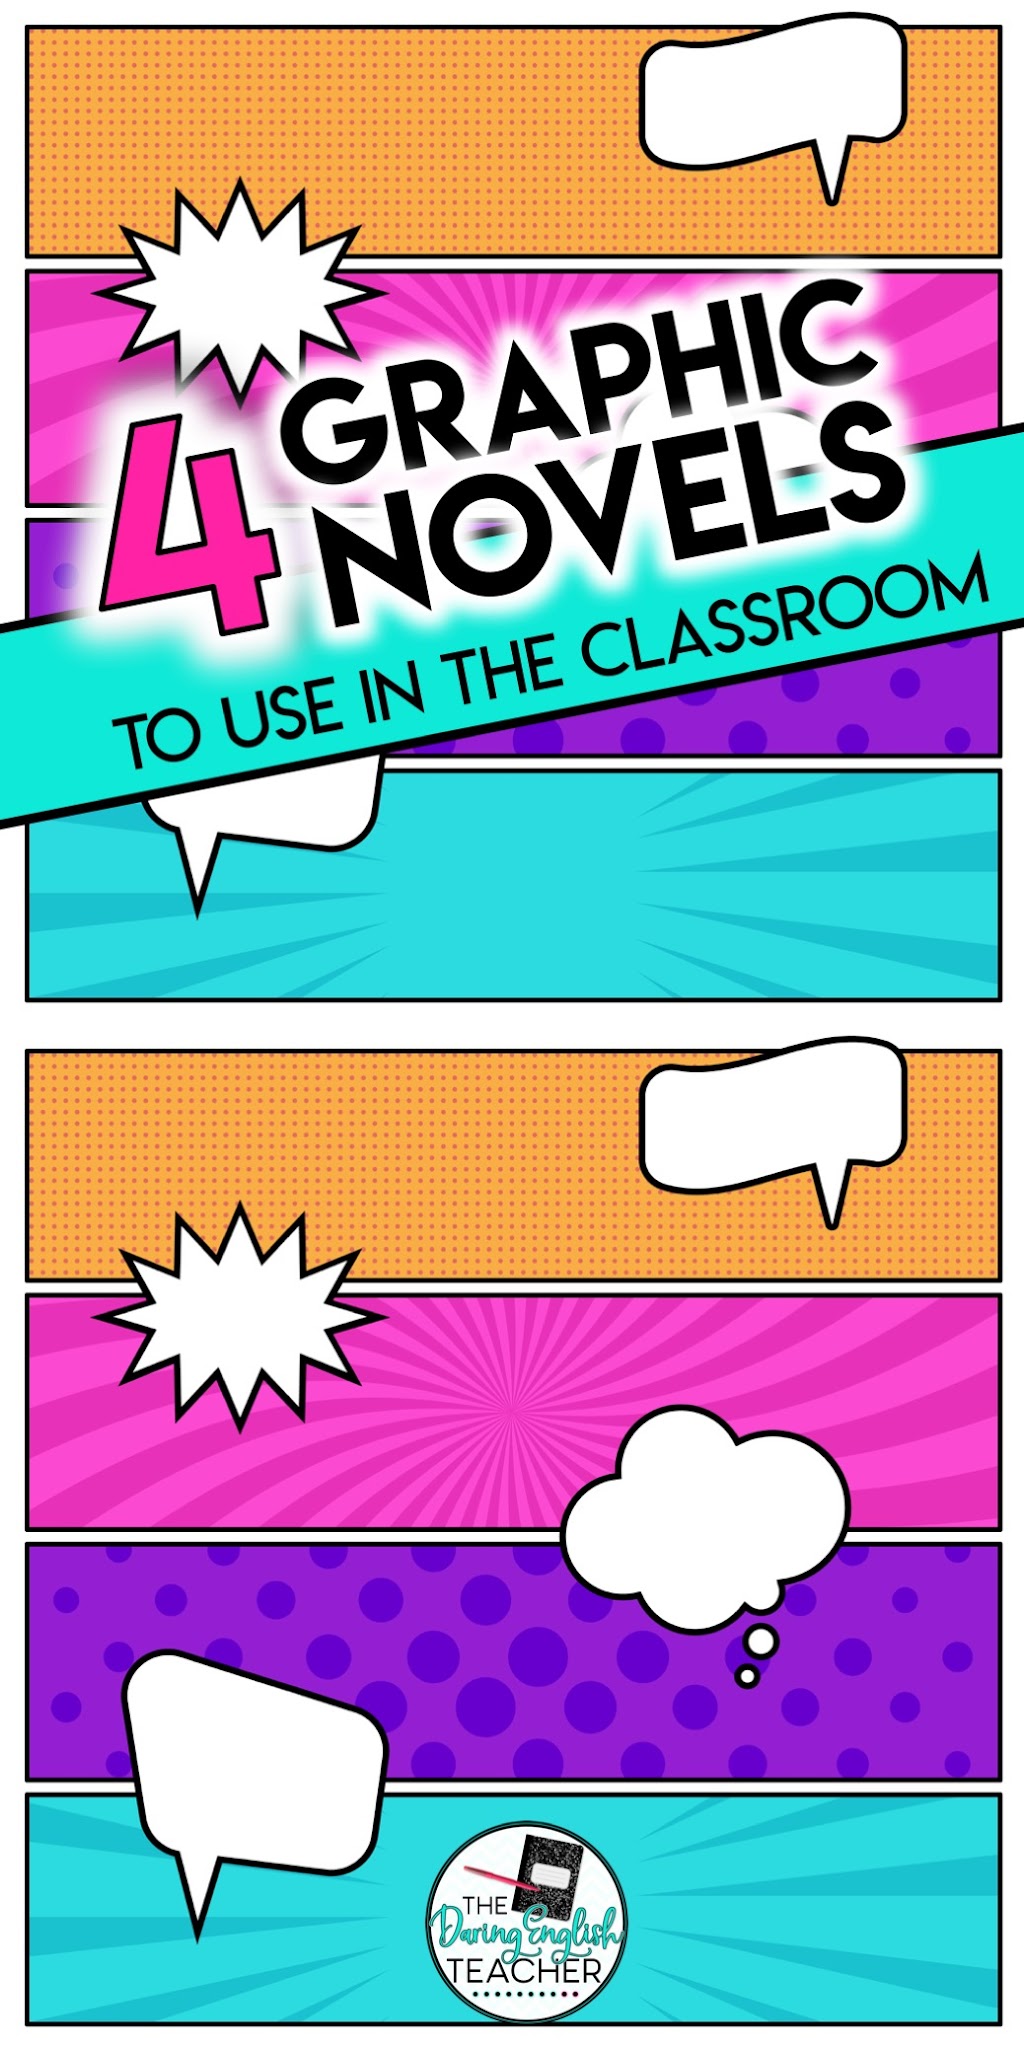 Four Graphic Novels to Use in the Classroom